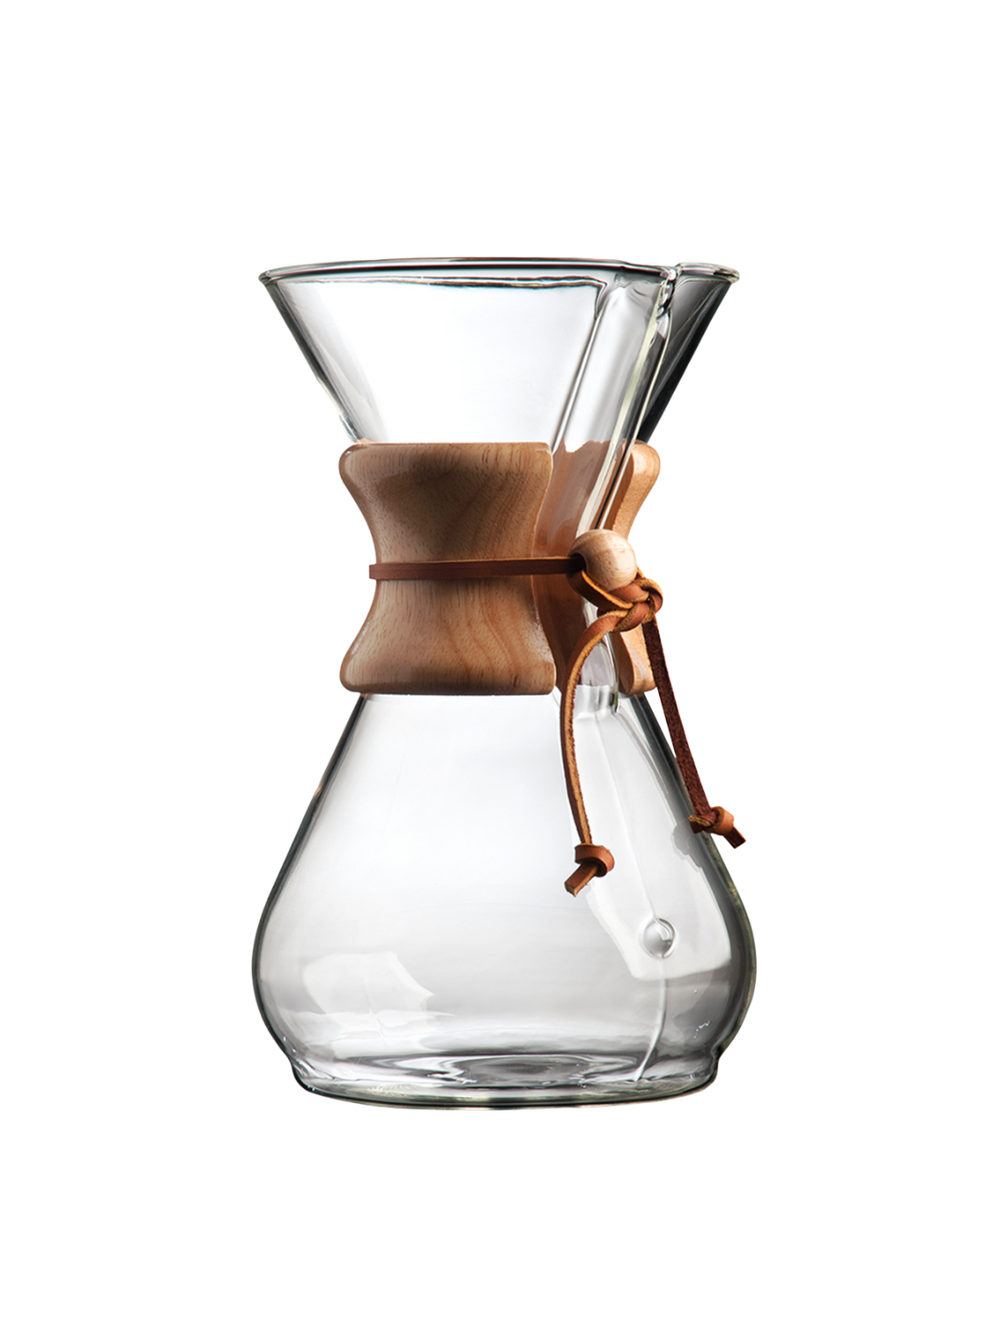 Chemex Ottomatic 2.0 Automatic Pour-Over Coffee Maker + Reviews, Crate &  Barrel Canada